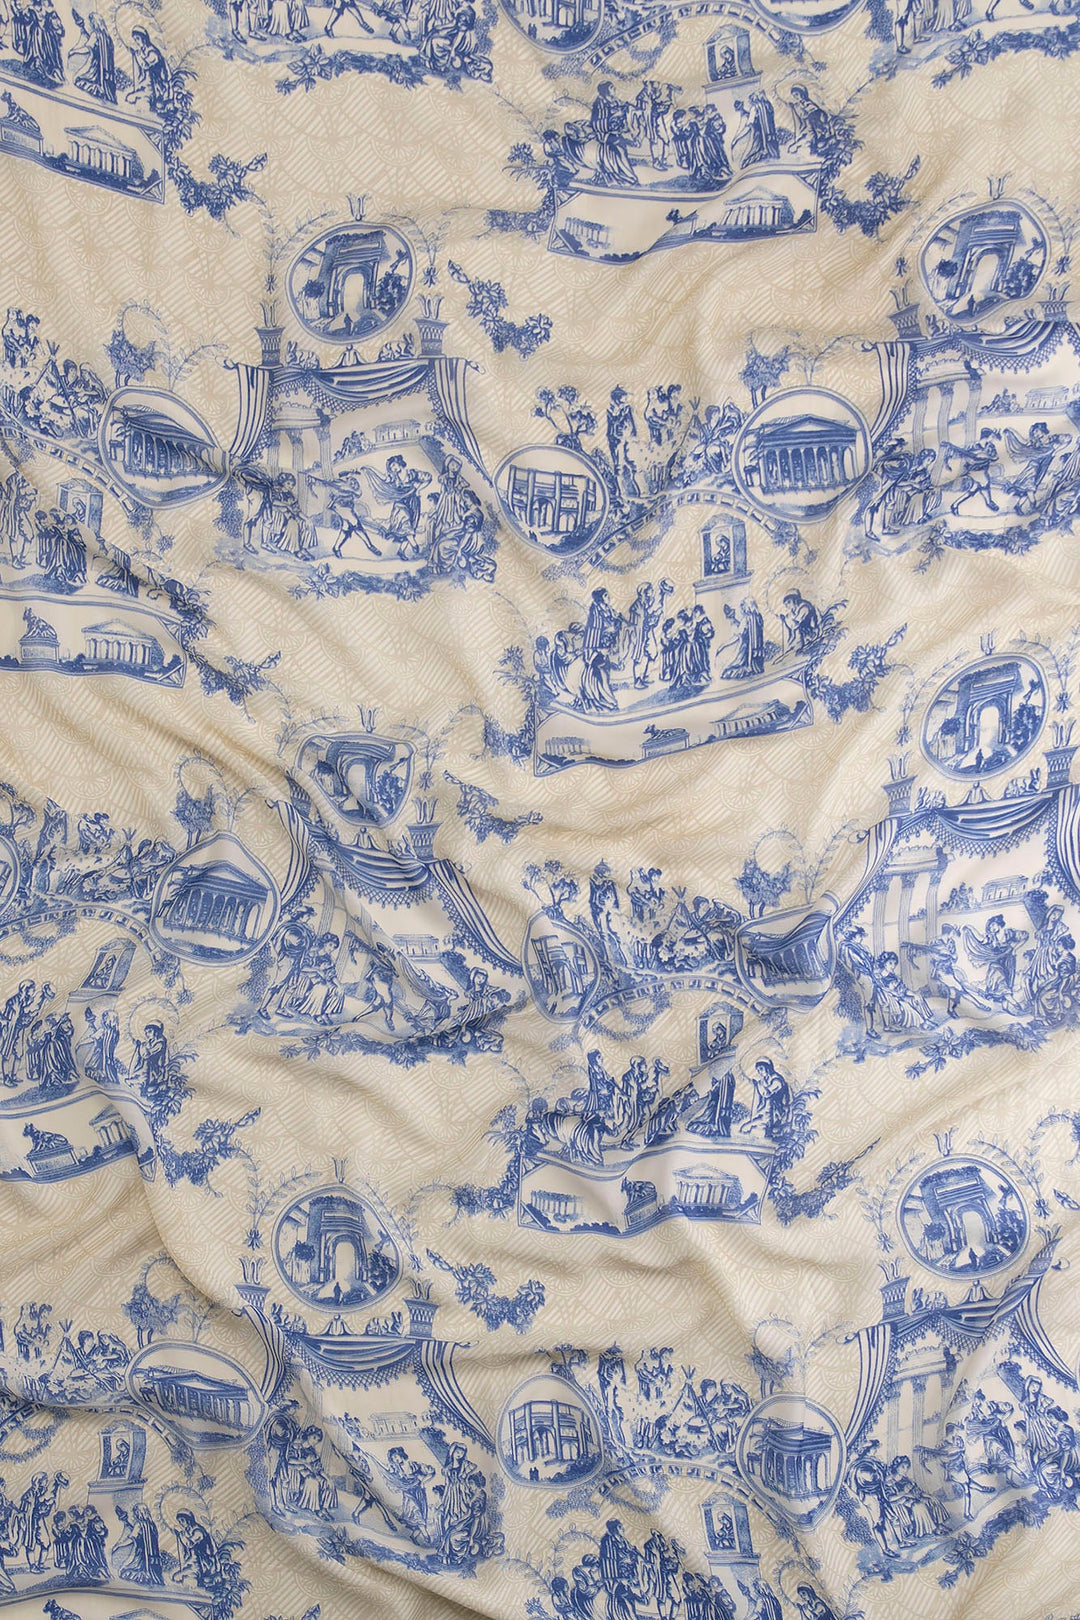 inspired by classic French Toile De Jouy fabrics